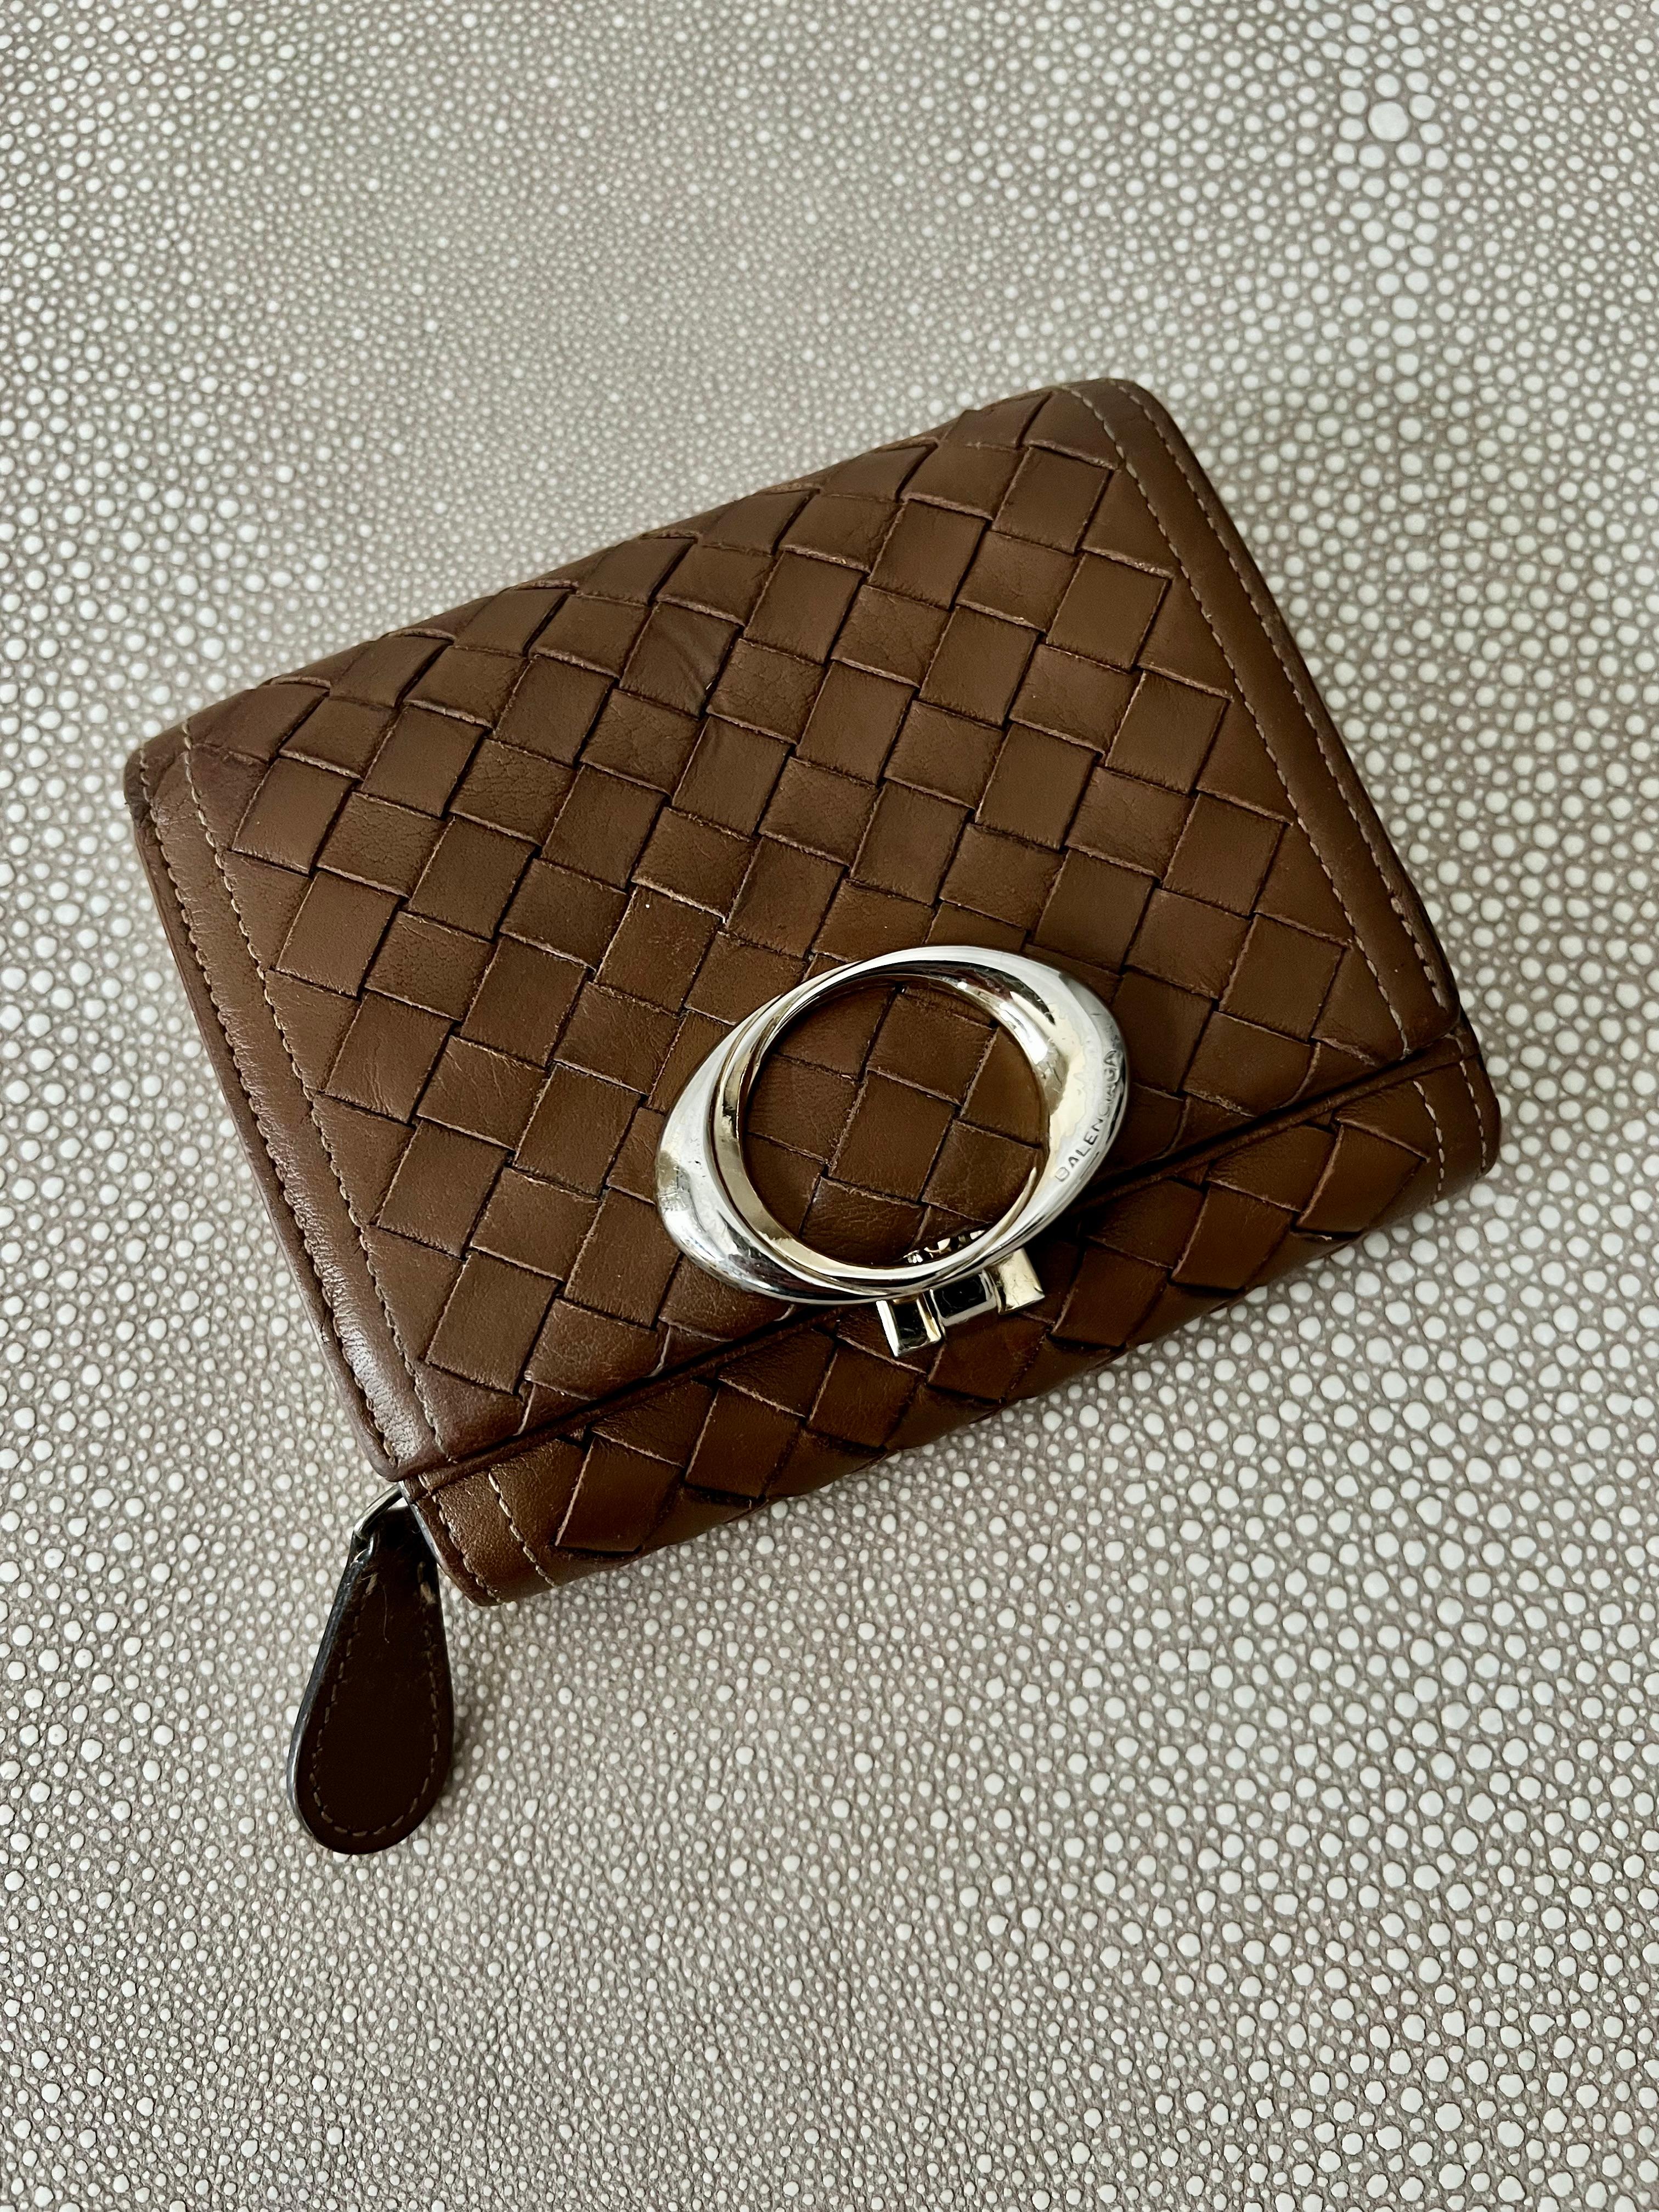 Duo Fold Balenciaga Wallet With Brass Closure For Sale 3